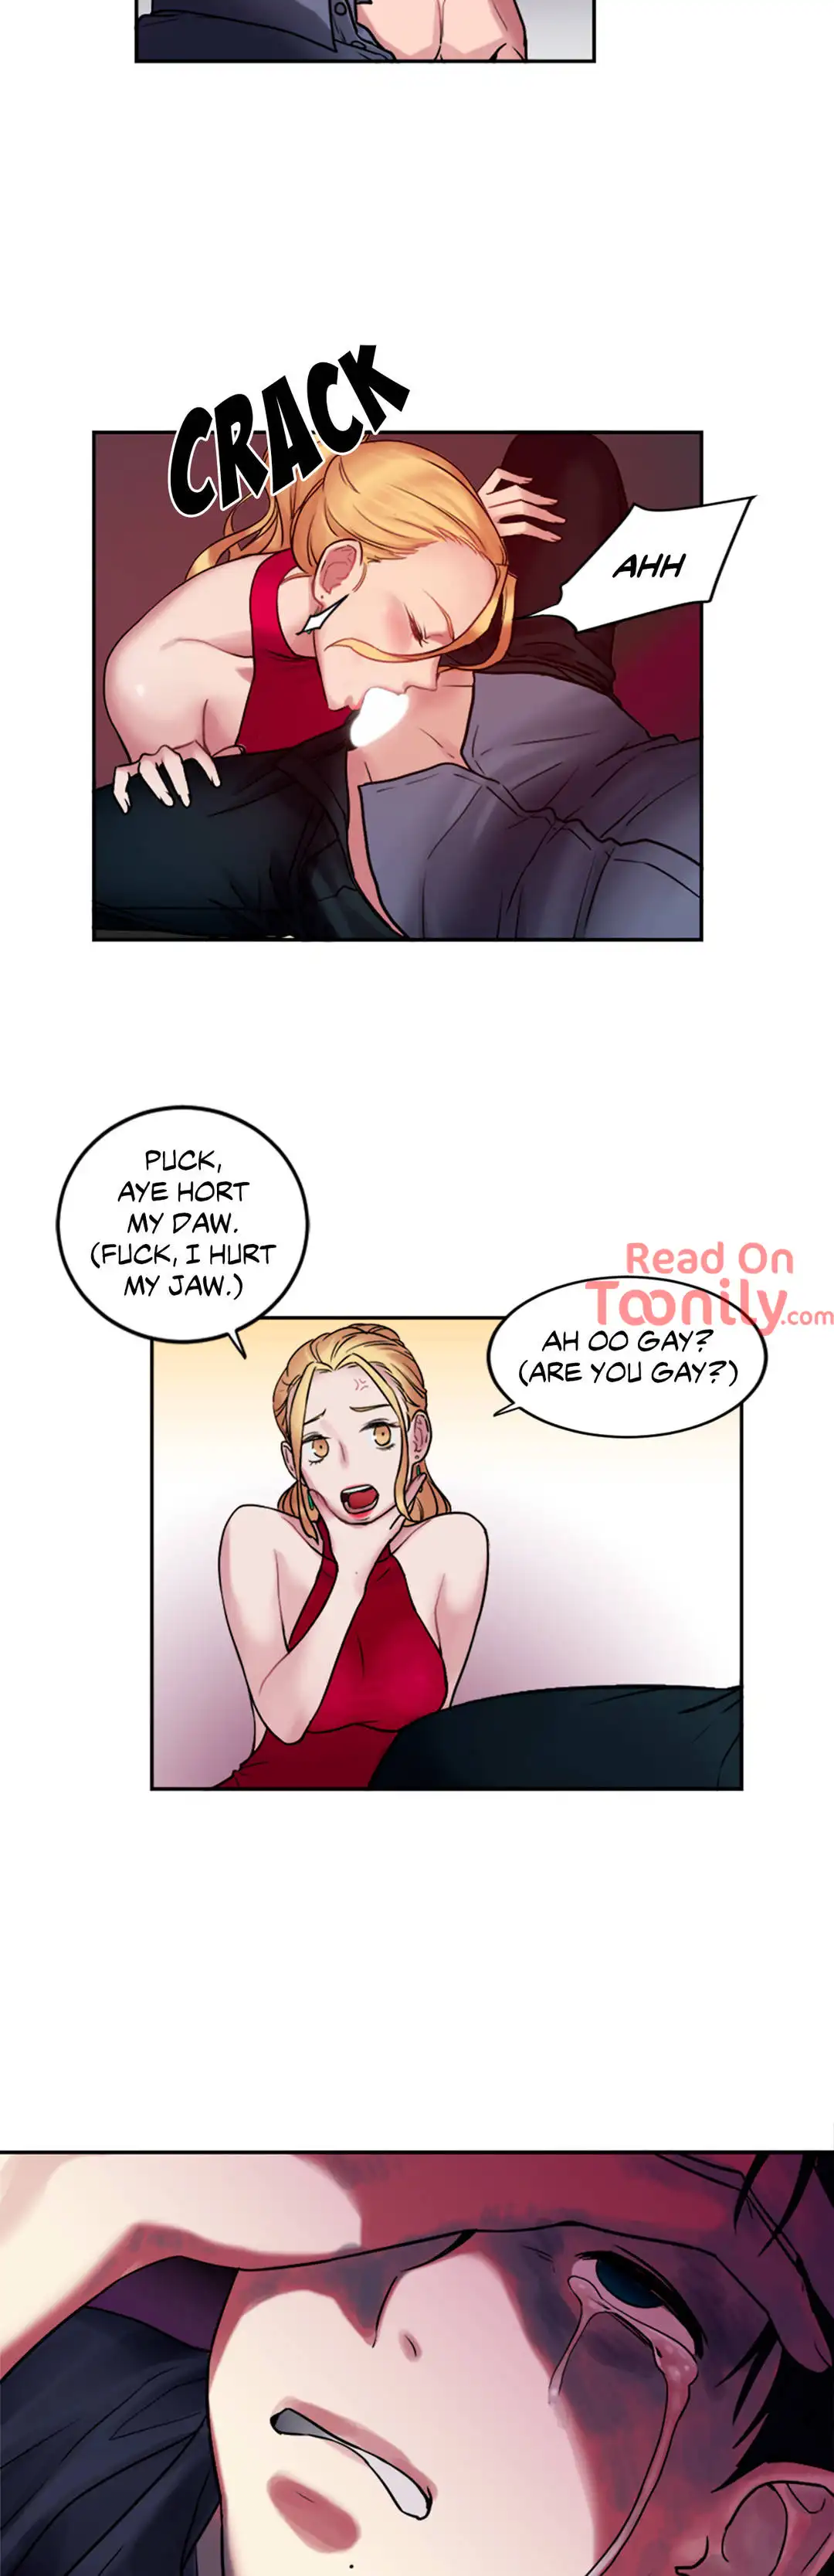 Tie Me Up! - Chapter 1 Page 24